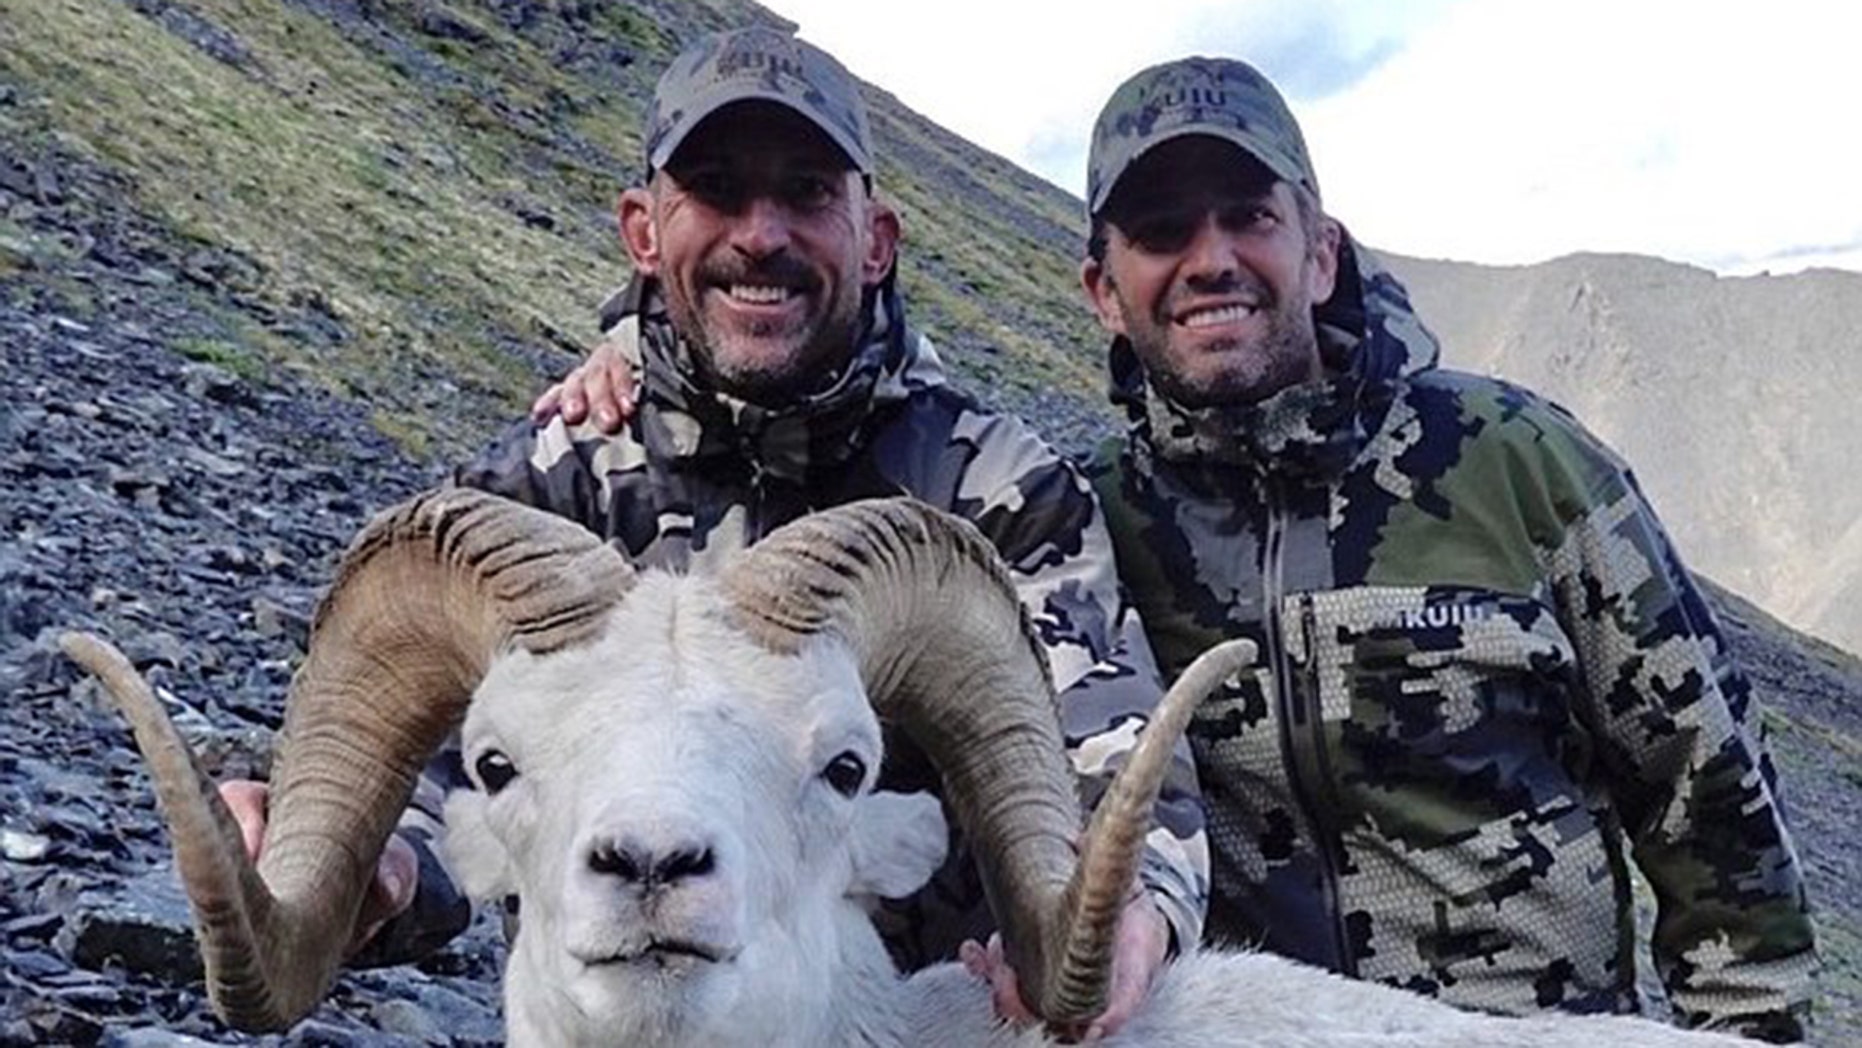 Jason Hairston Ex Nfl Player And Donald Trump Jrs Hunting Partner Dead At 47 After Years Of